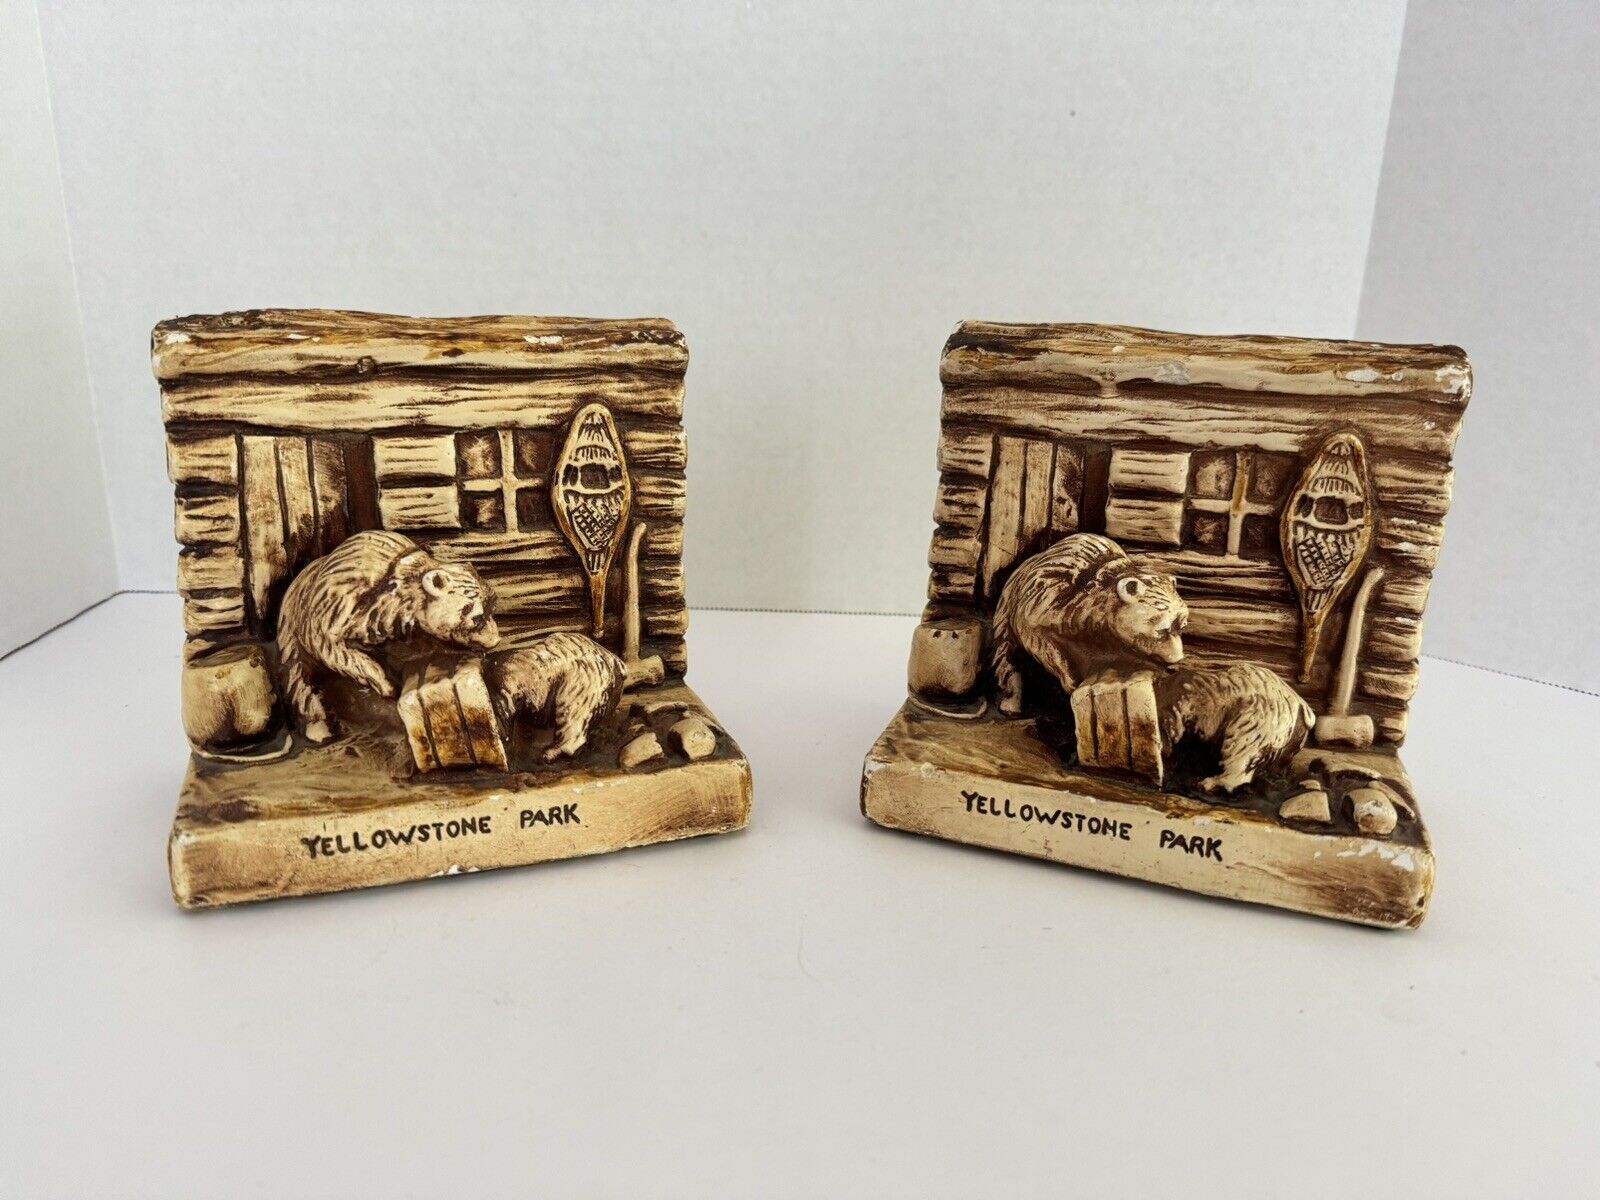 VINTAGE YELLOWSTONE N P CHALK WARE BEARS AND CABIN BOOKENDS